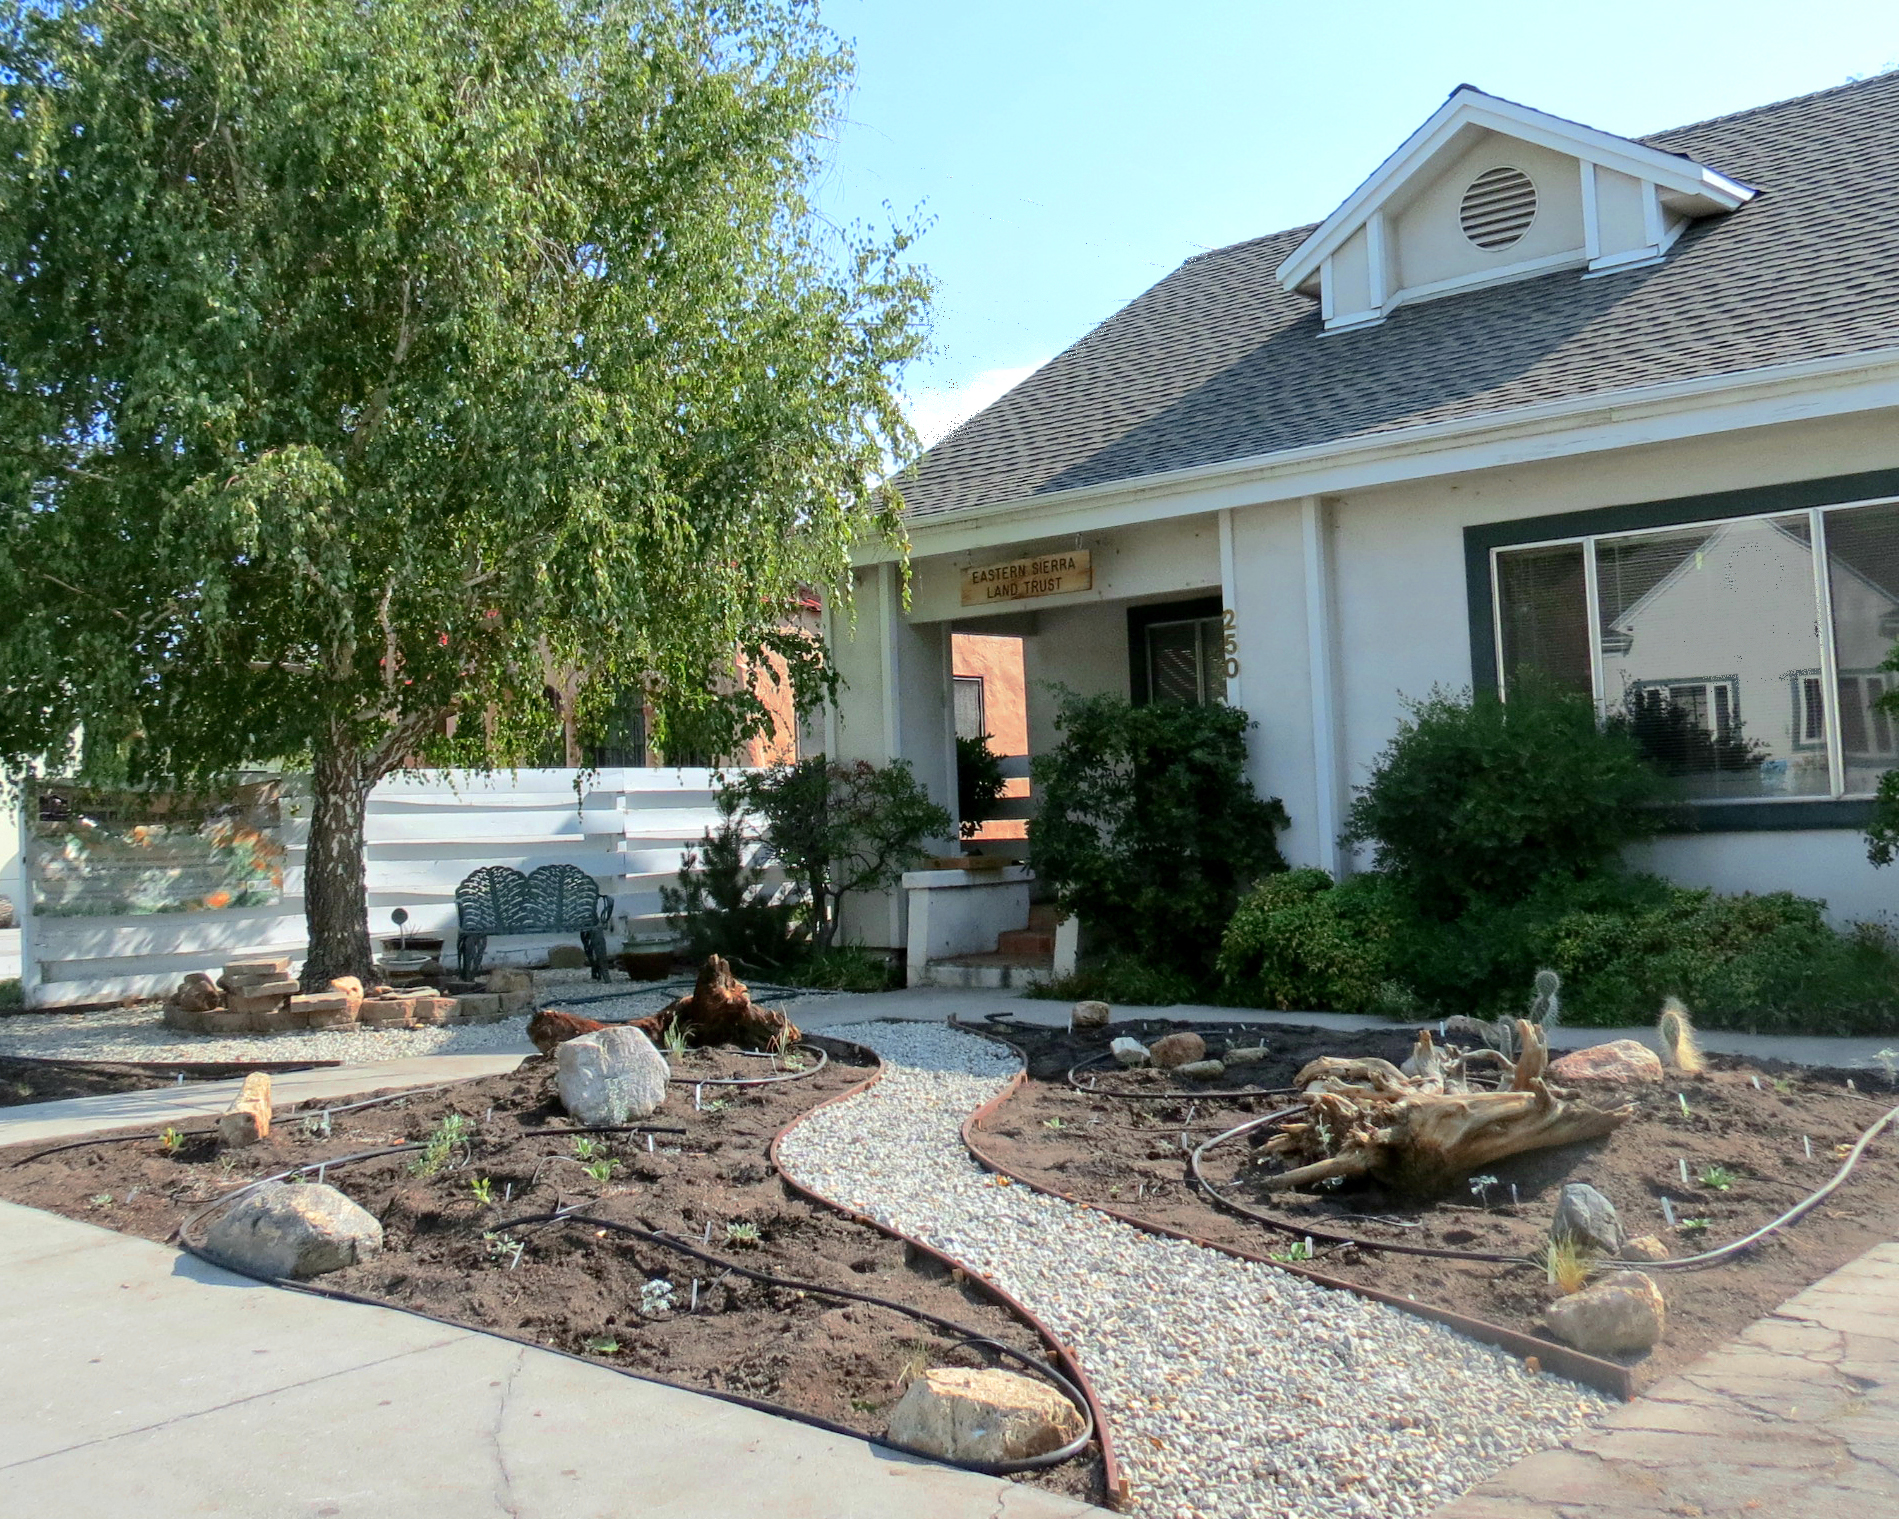 In addition to their financial contributions, Chalfant Big Trees Farm & Feed helped supply Eastern Sierra Land Trust with many of the materials needed to create our new Pollinator Demonstration Garden.